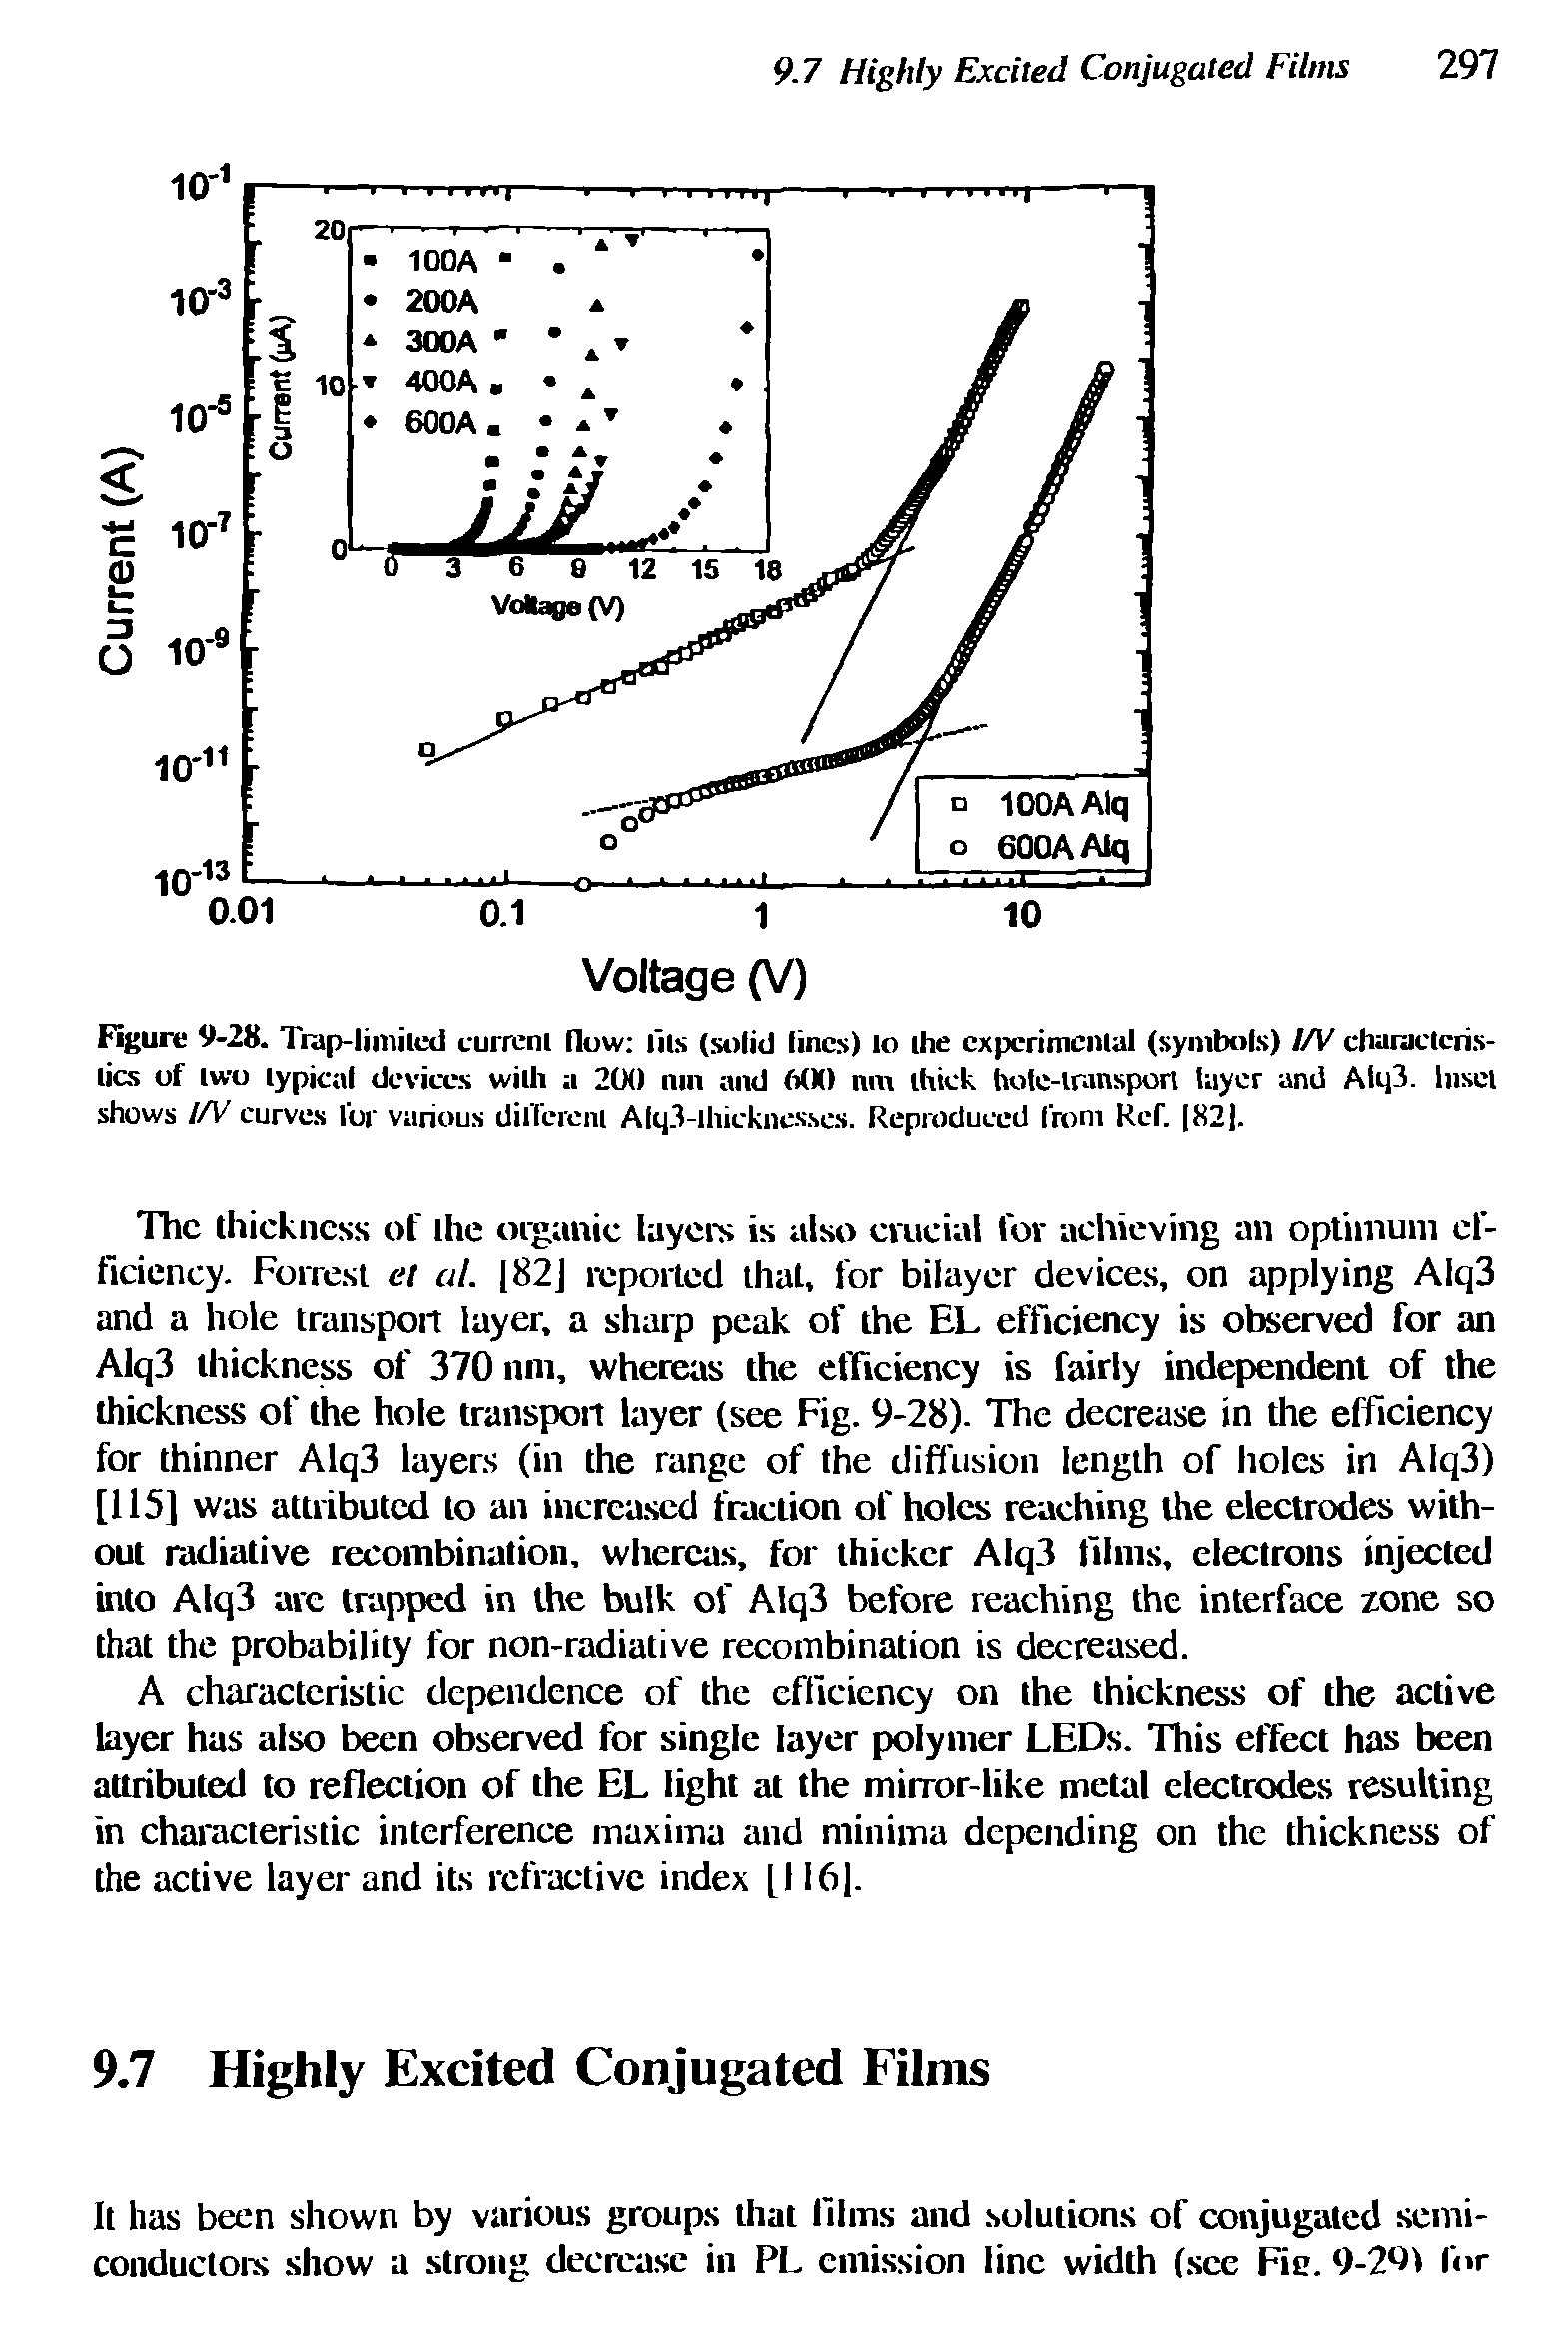 Figure 9-28. Trap-limited current (low ills (solid lines) lo the experimental (symbols) l/V characteristics of two typical devices with a 200 nin and 600 nm thick hole-transport layer and Alq3. Inset shows l/V curves for various different Alq3-lhicknesses. Reproduced front Ref. 82. ...